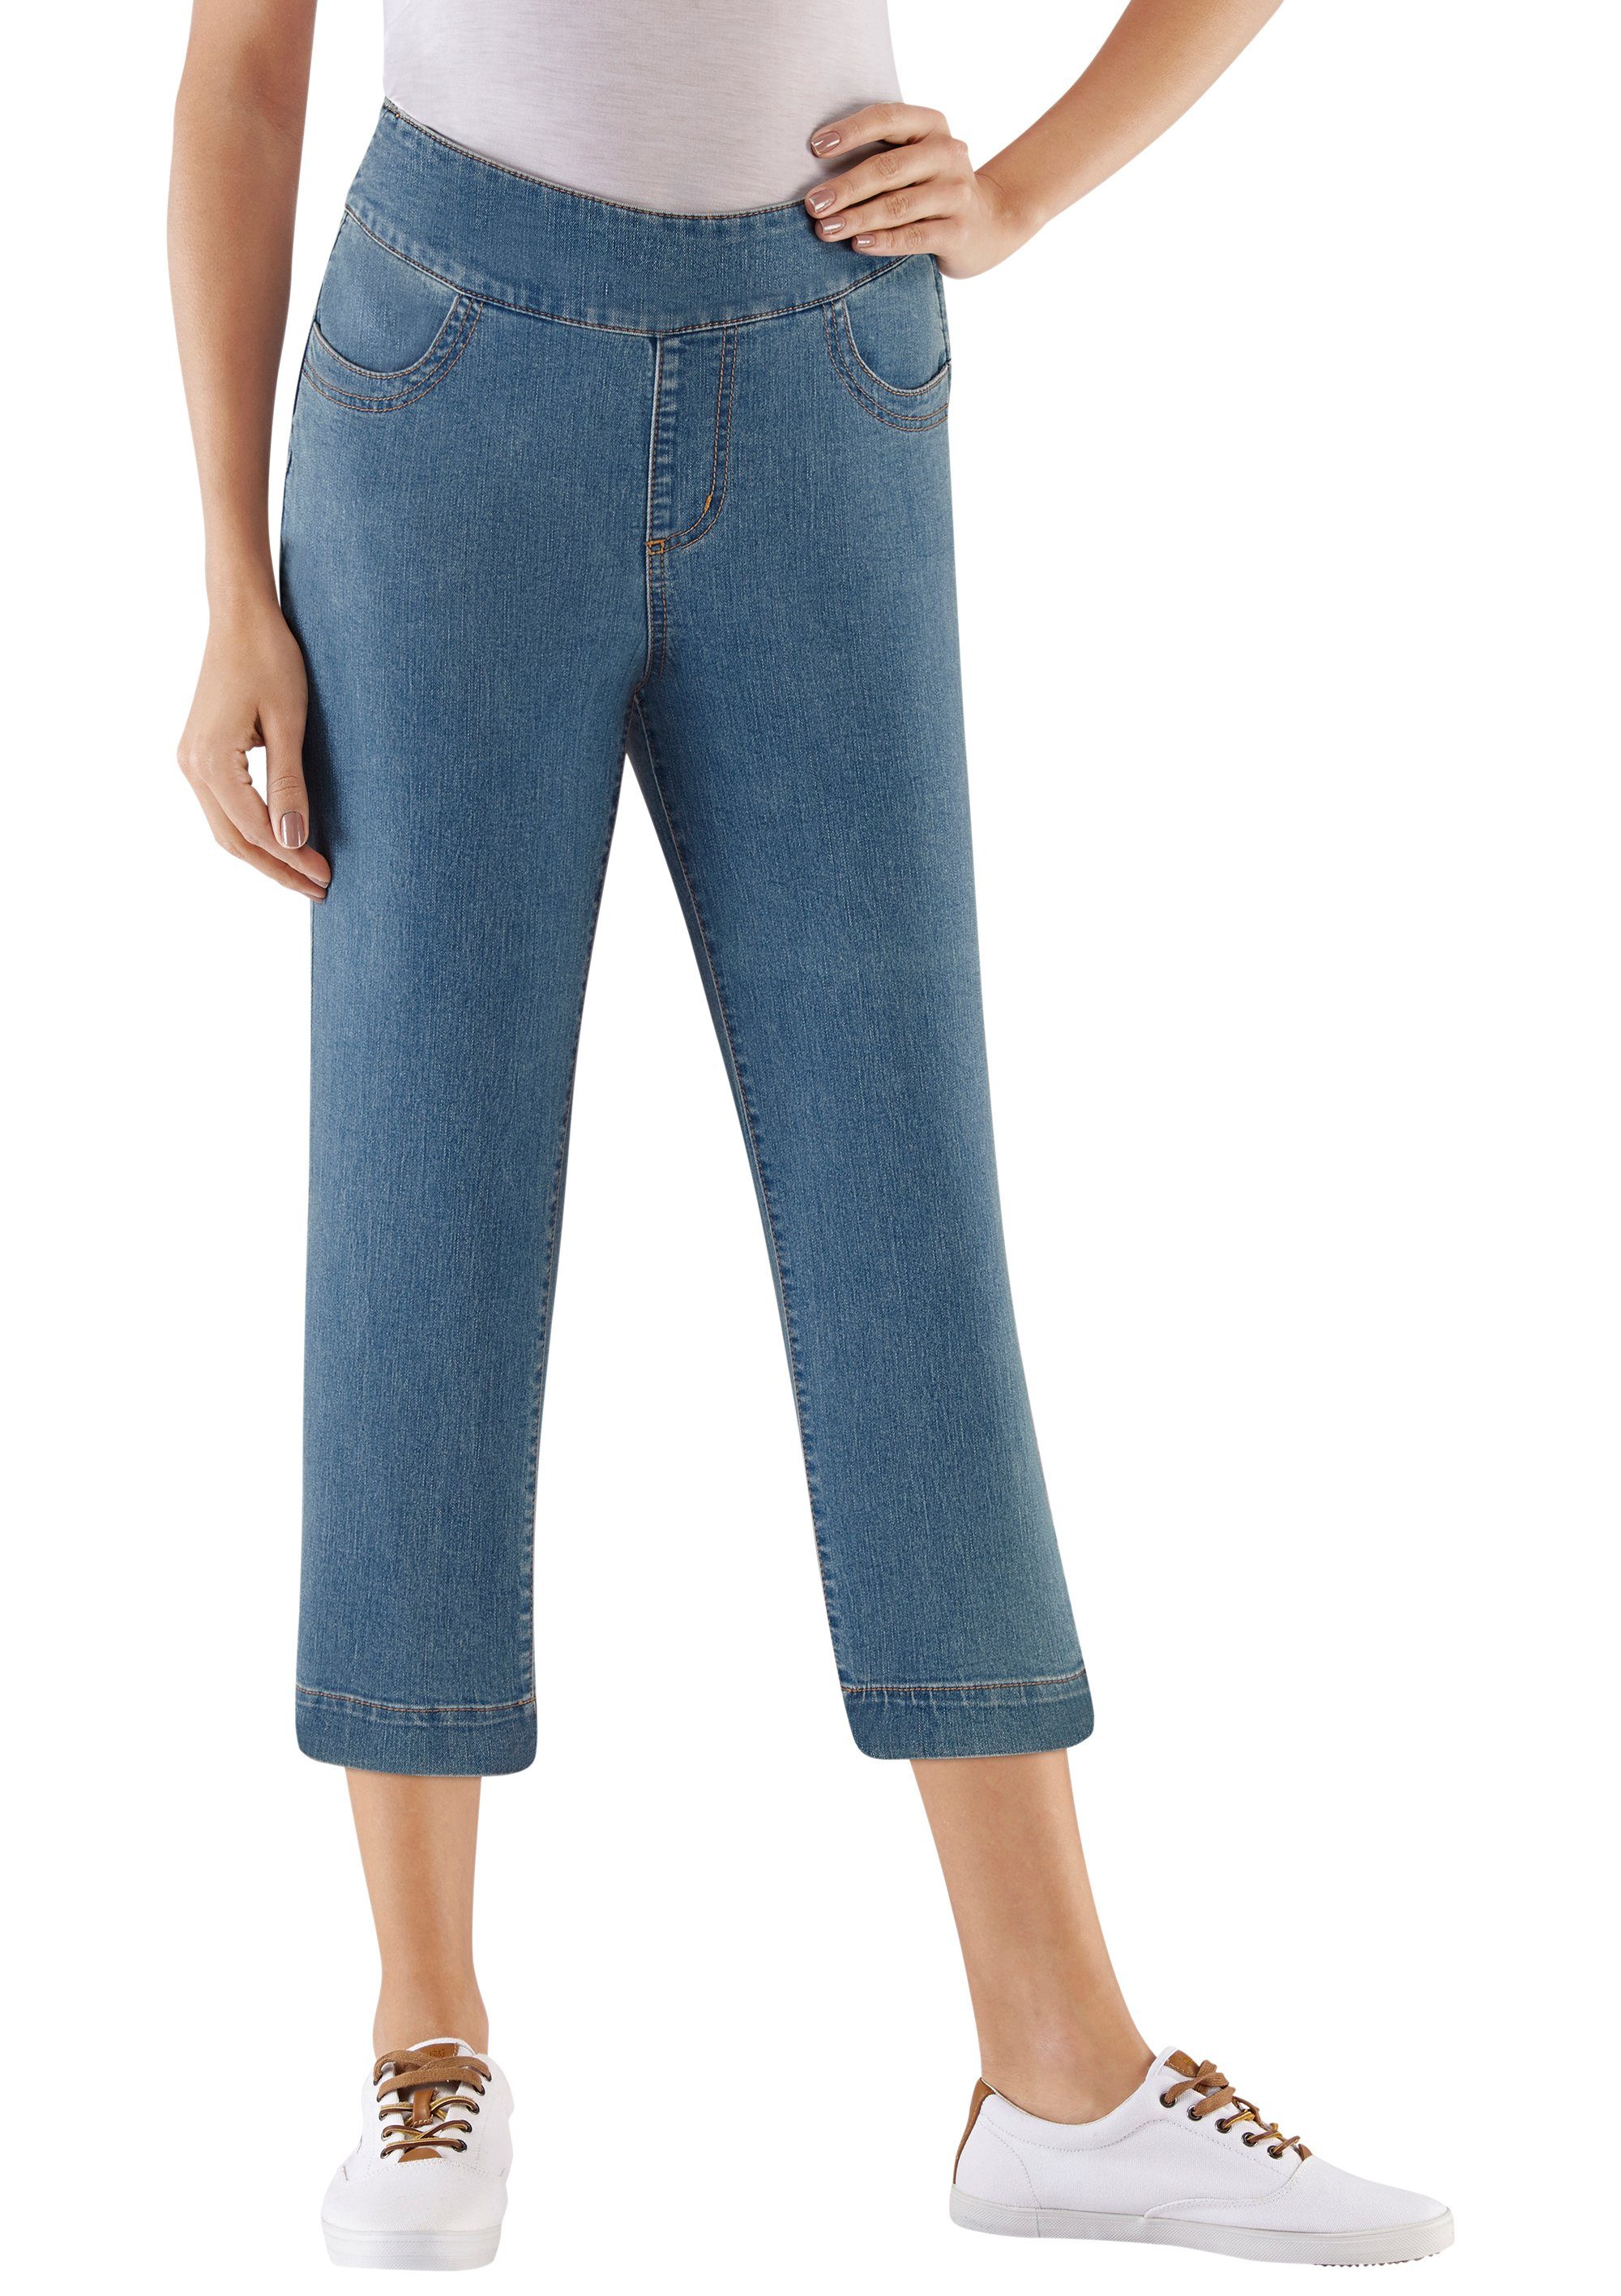 Otto - Classic Inspirationen NU 15% KORTING: Classic Inspirationen jeans in 7/8-lengte